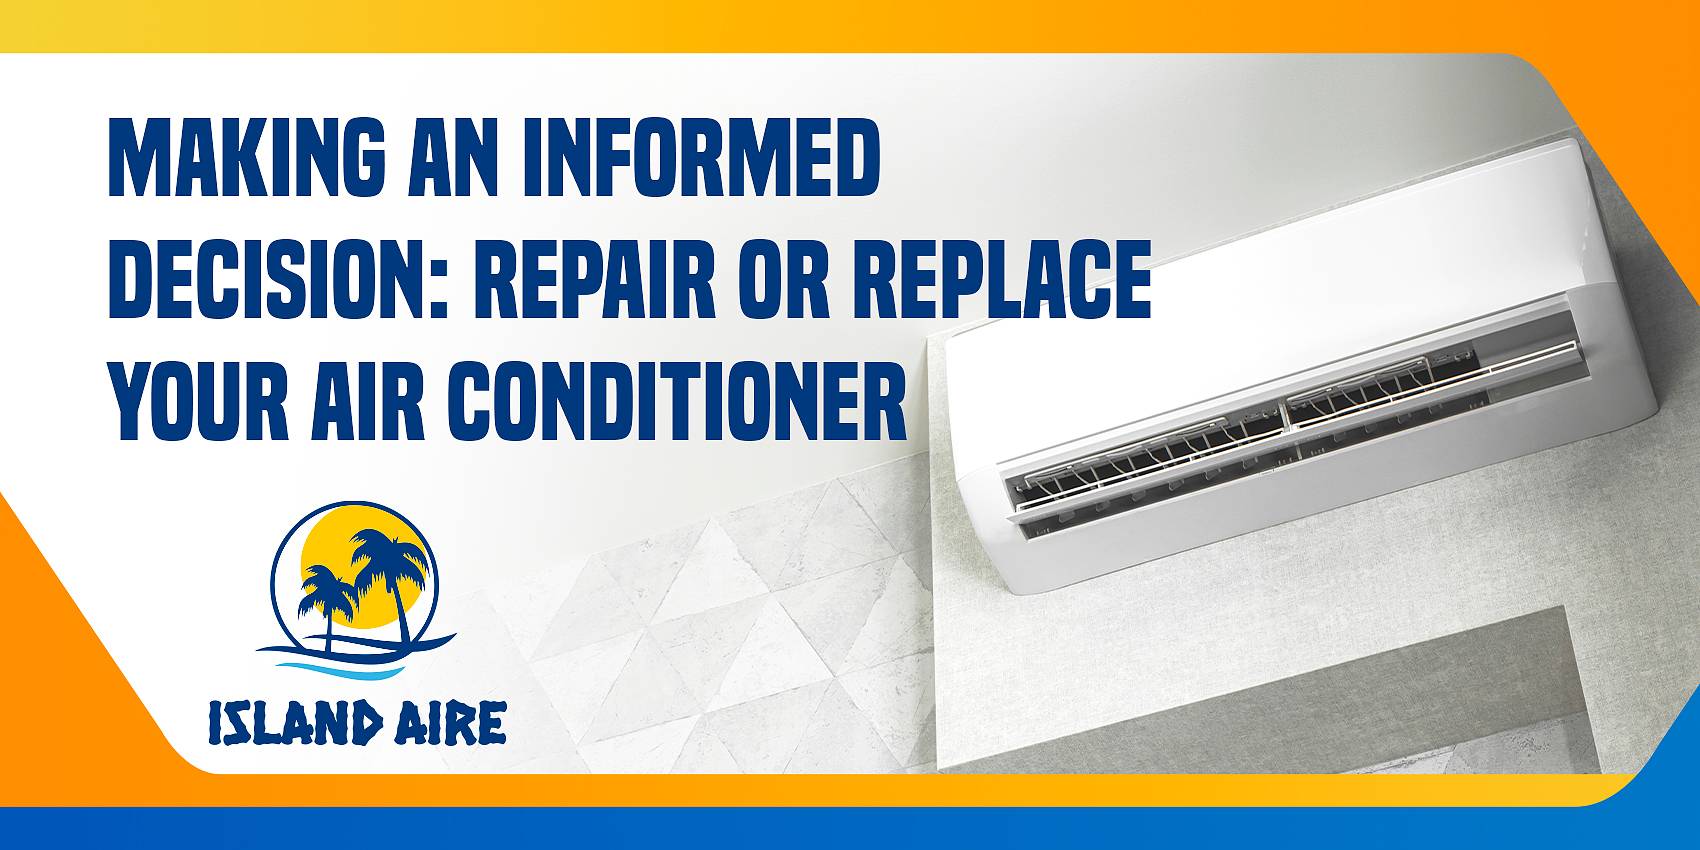 Making an Informed Decision: Repair or Replace Your Air Conditioner